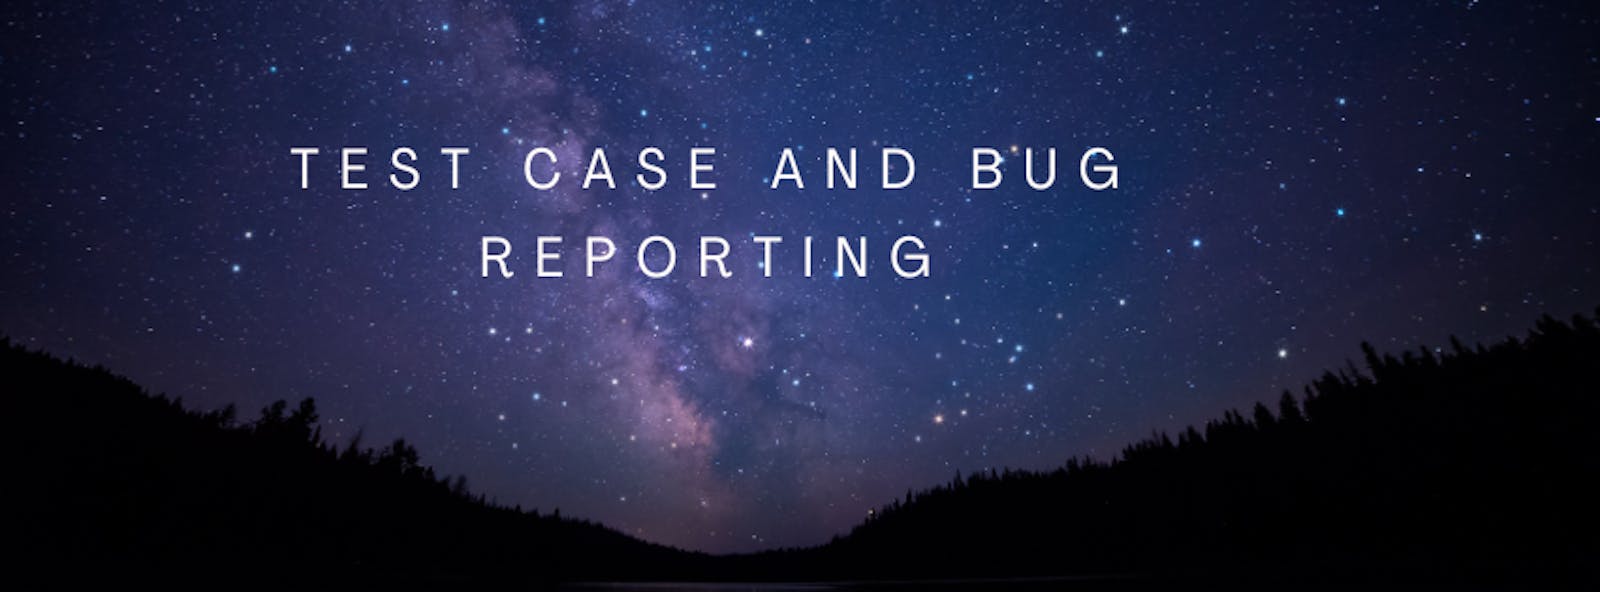 Task 5: Test case and bug reporting